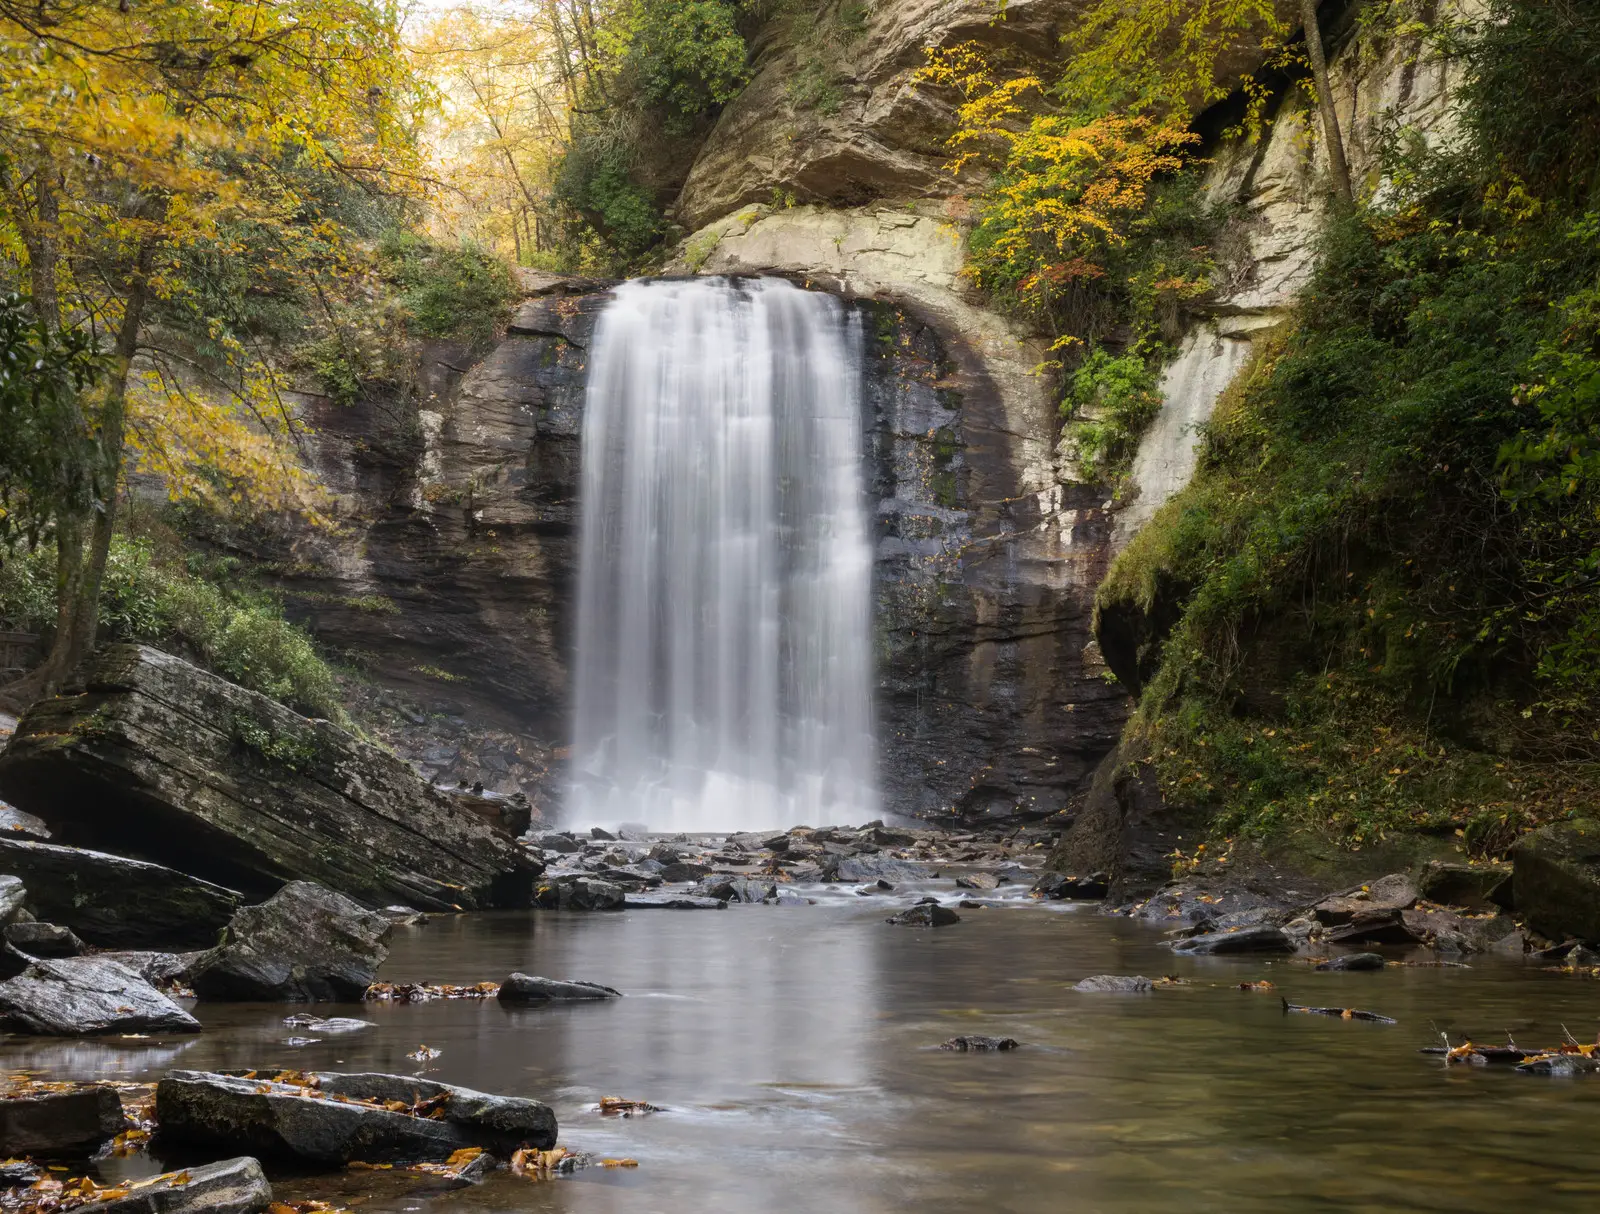 Looking glass Waterfall in autumn with leaves turning yellow and orange framing the waterfall